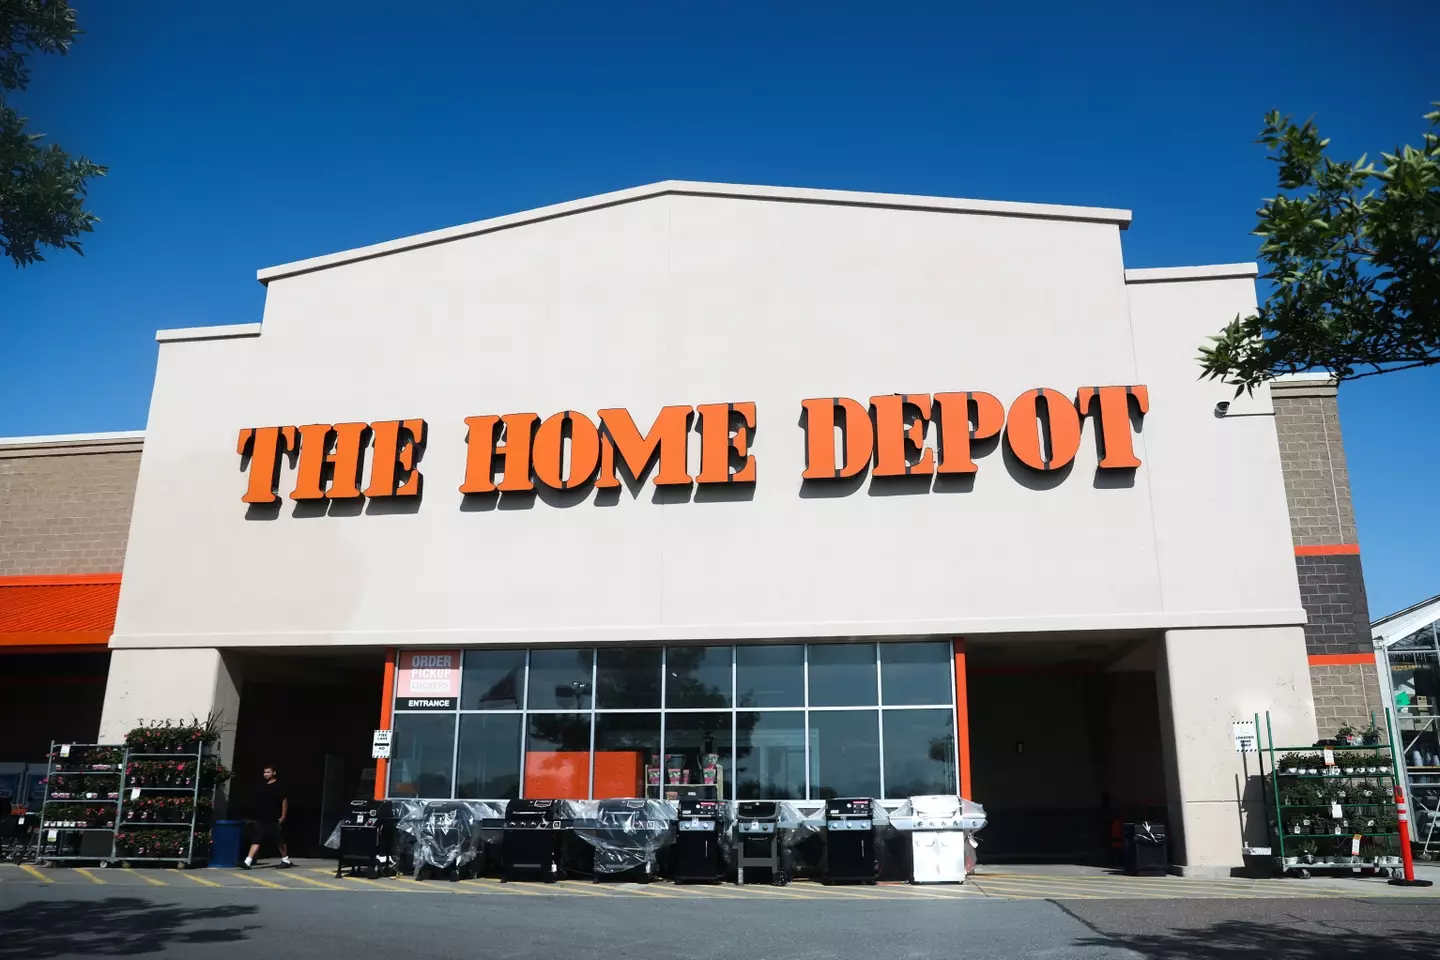 The Home Depot has since responded to the lawsuit claims.